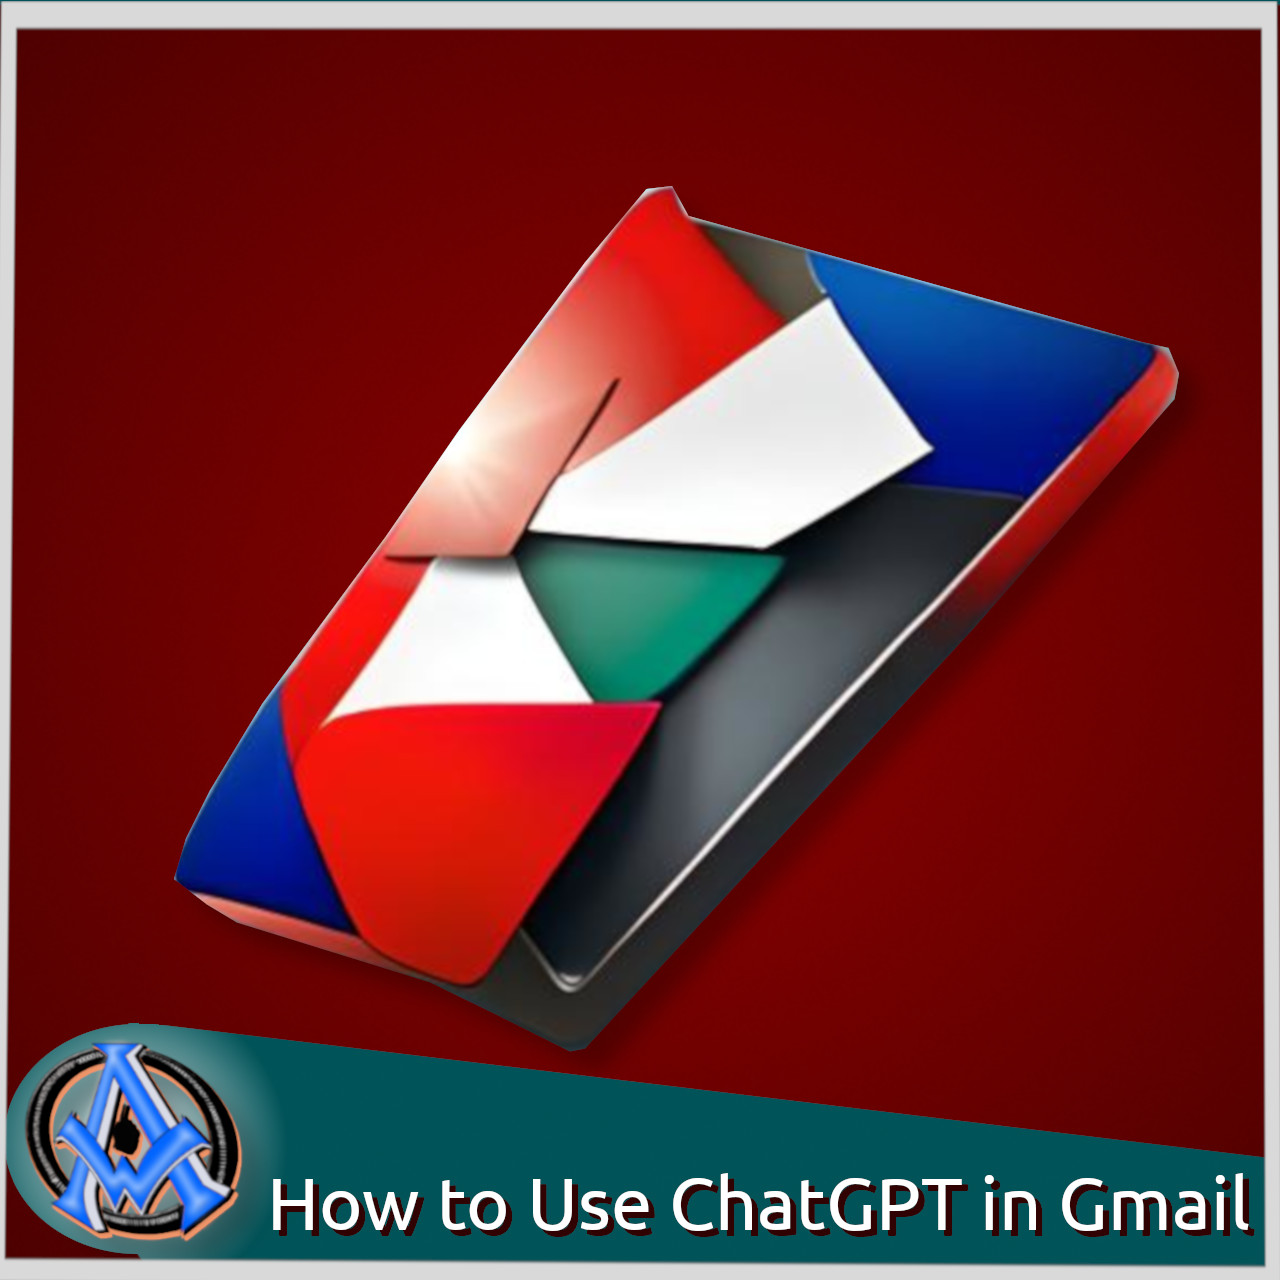 How to Use ChatGPT in Gmail